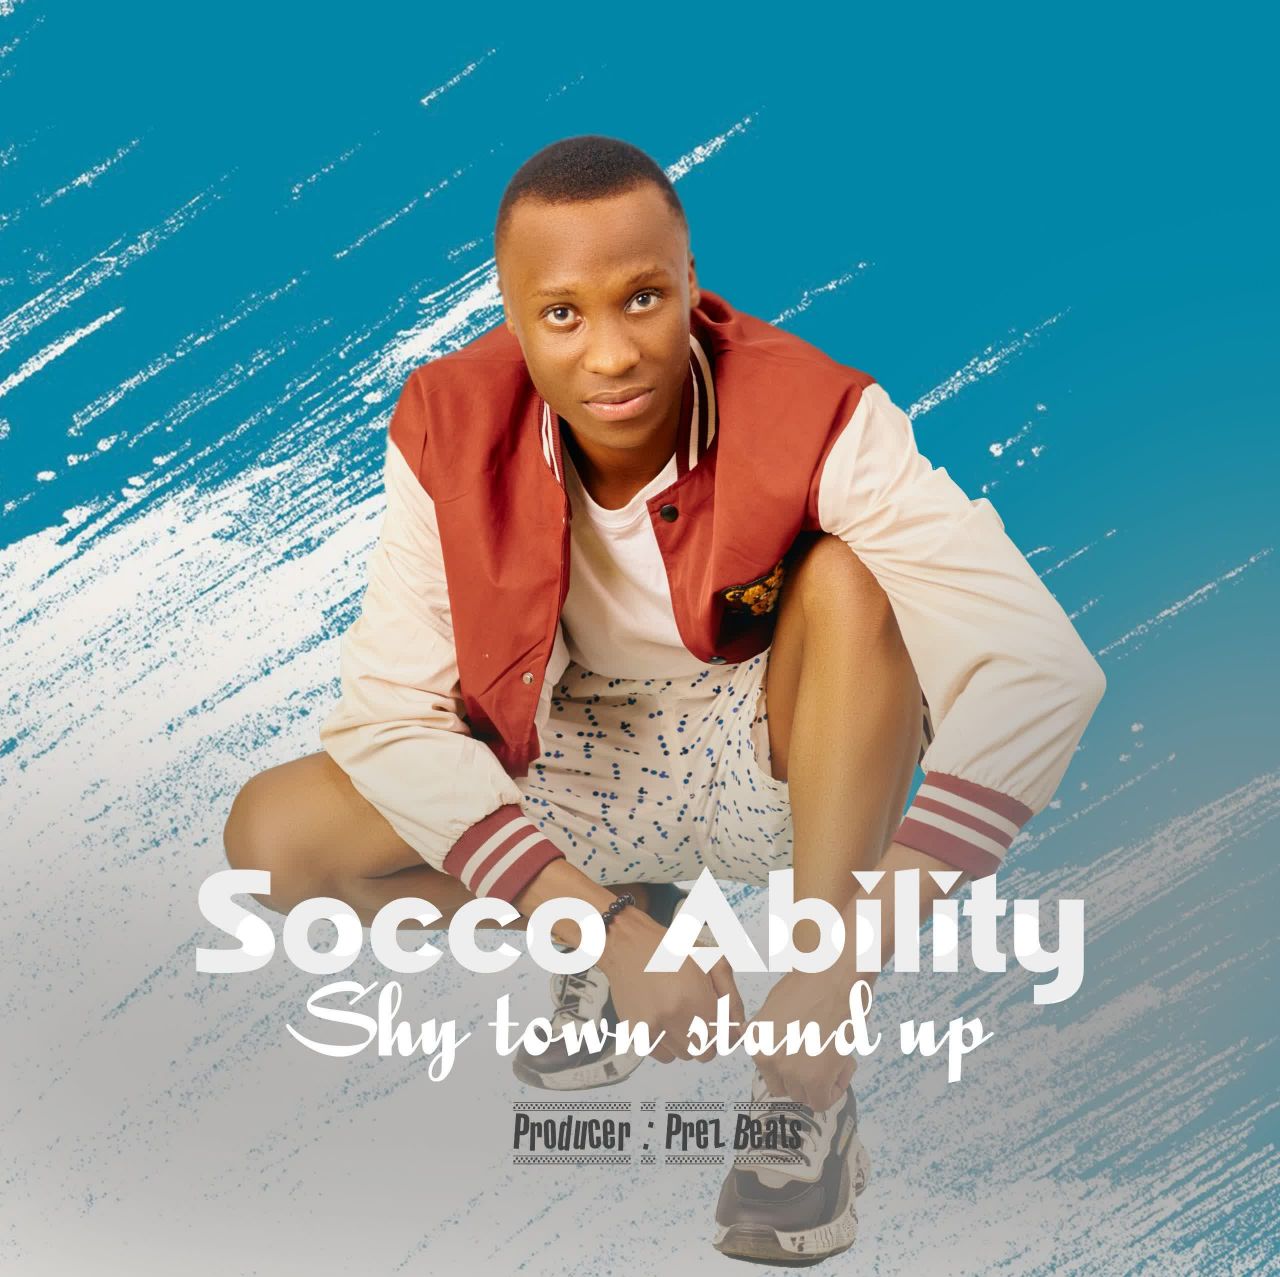  Socco Ability – Shy Town Stand up